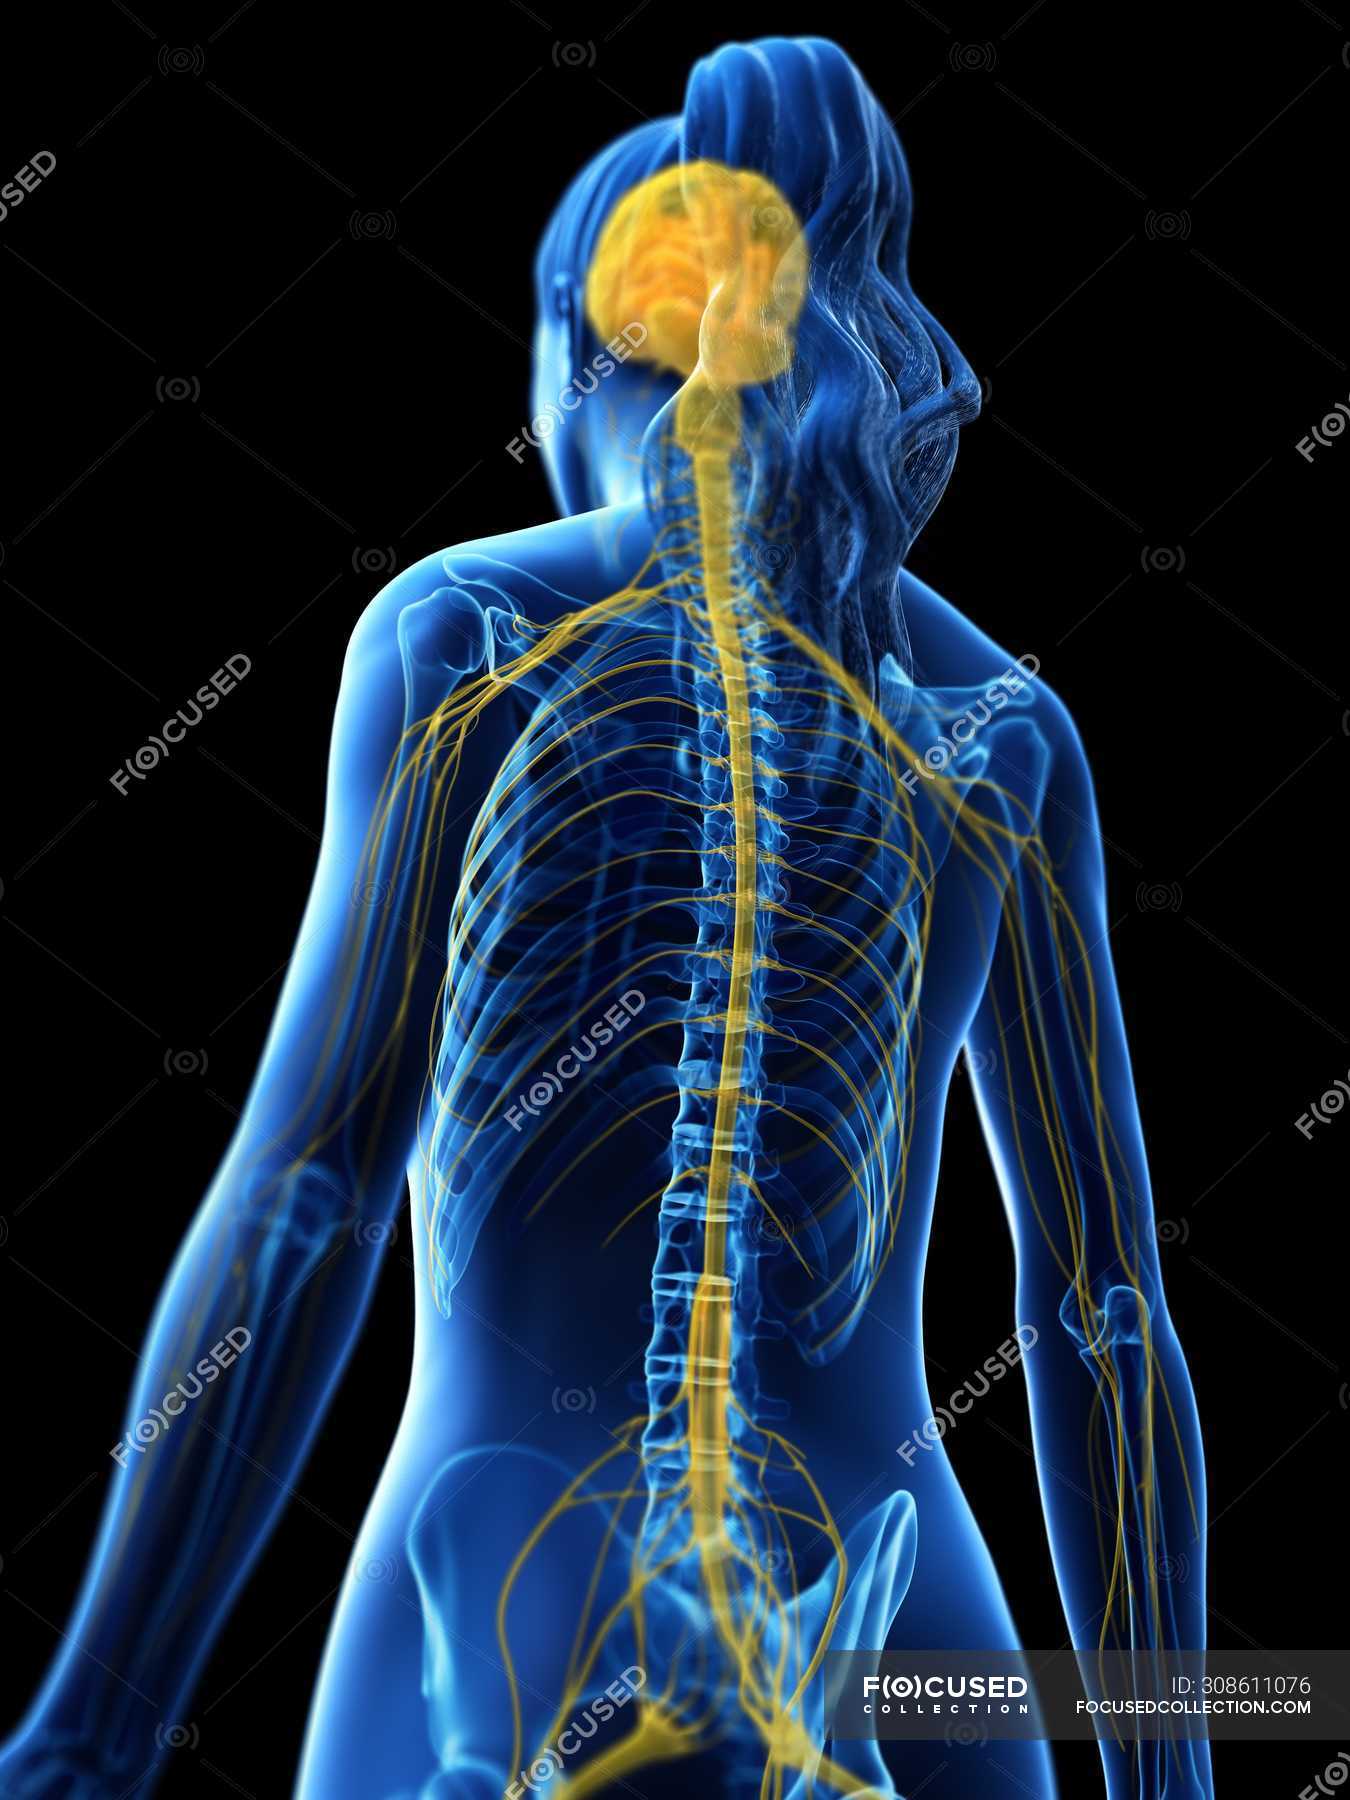 Abstract Female Silhouette With Visible Brain And Spinal Cord Of Nervous System Computer 4393